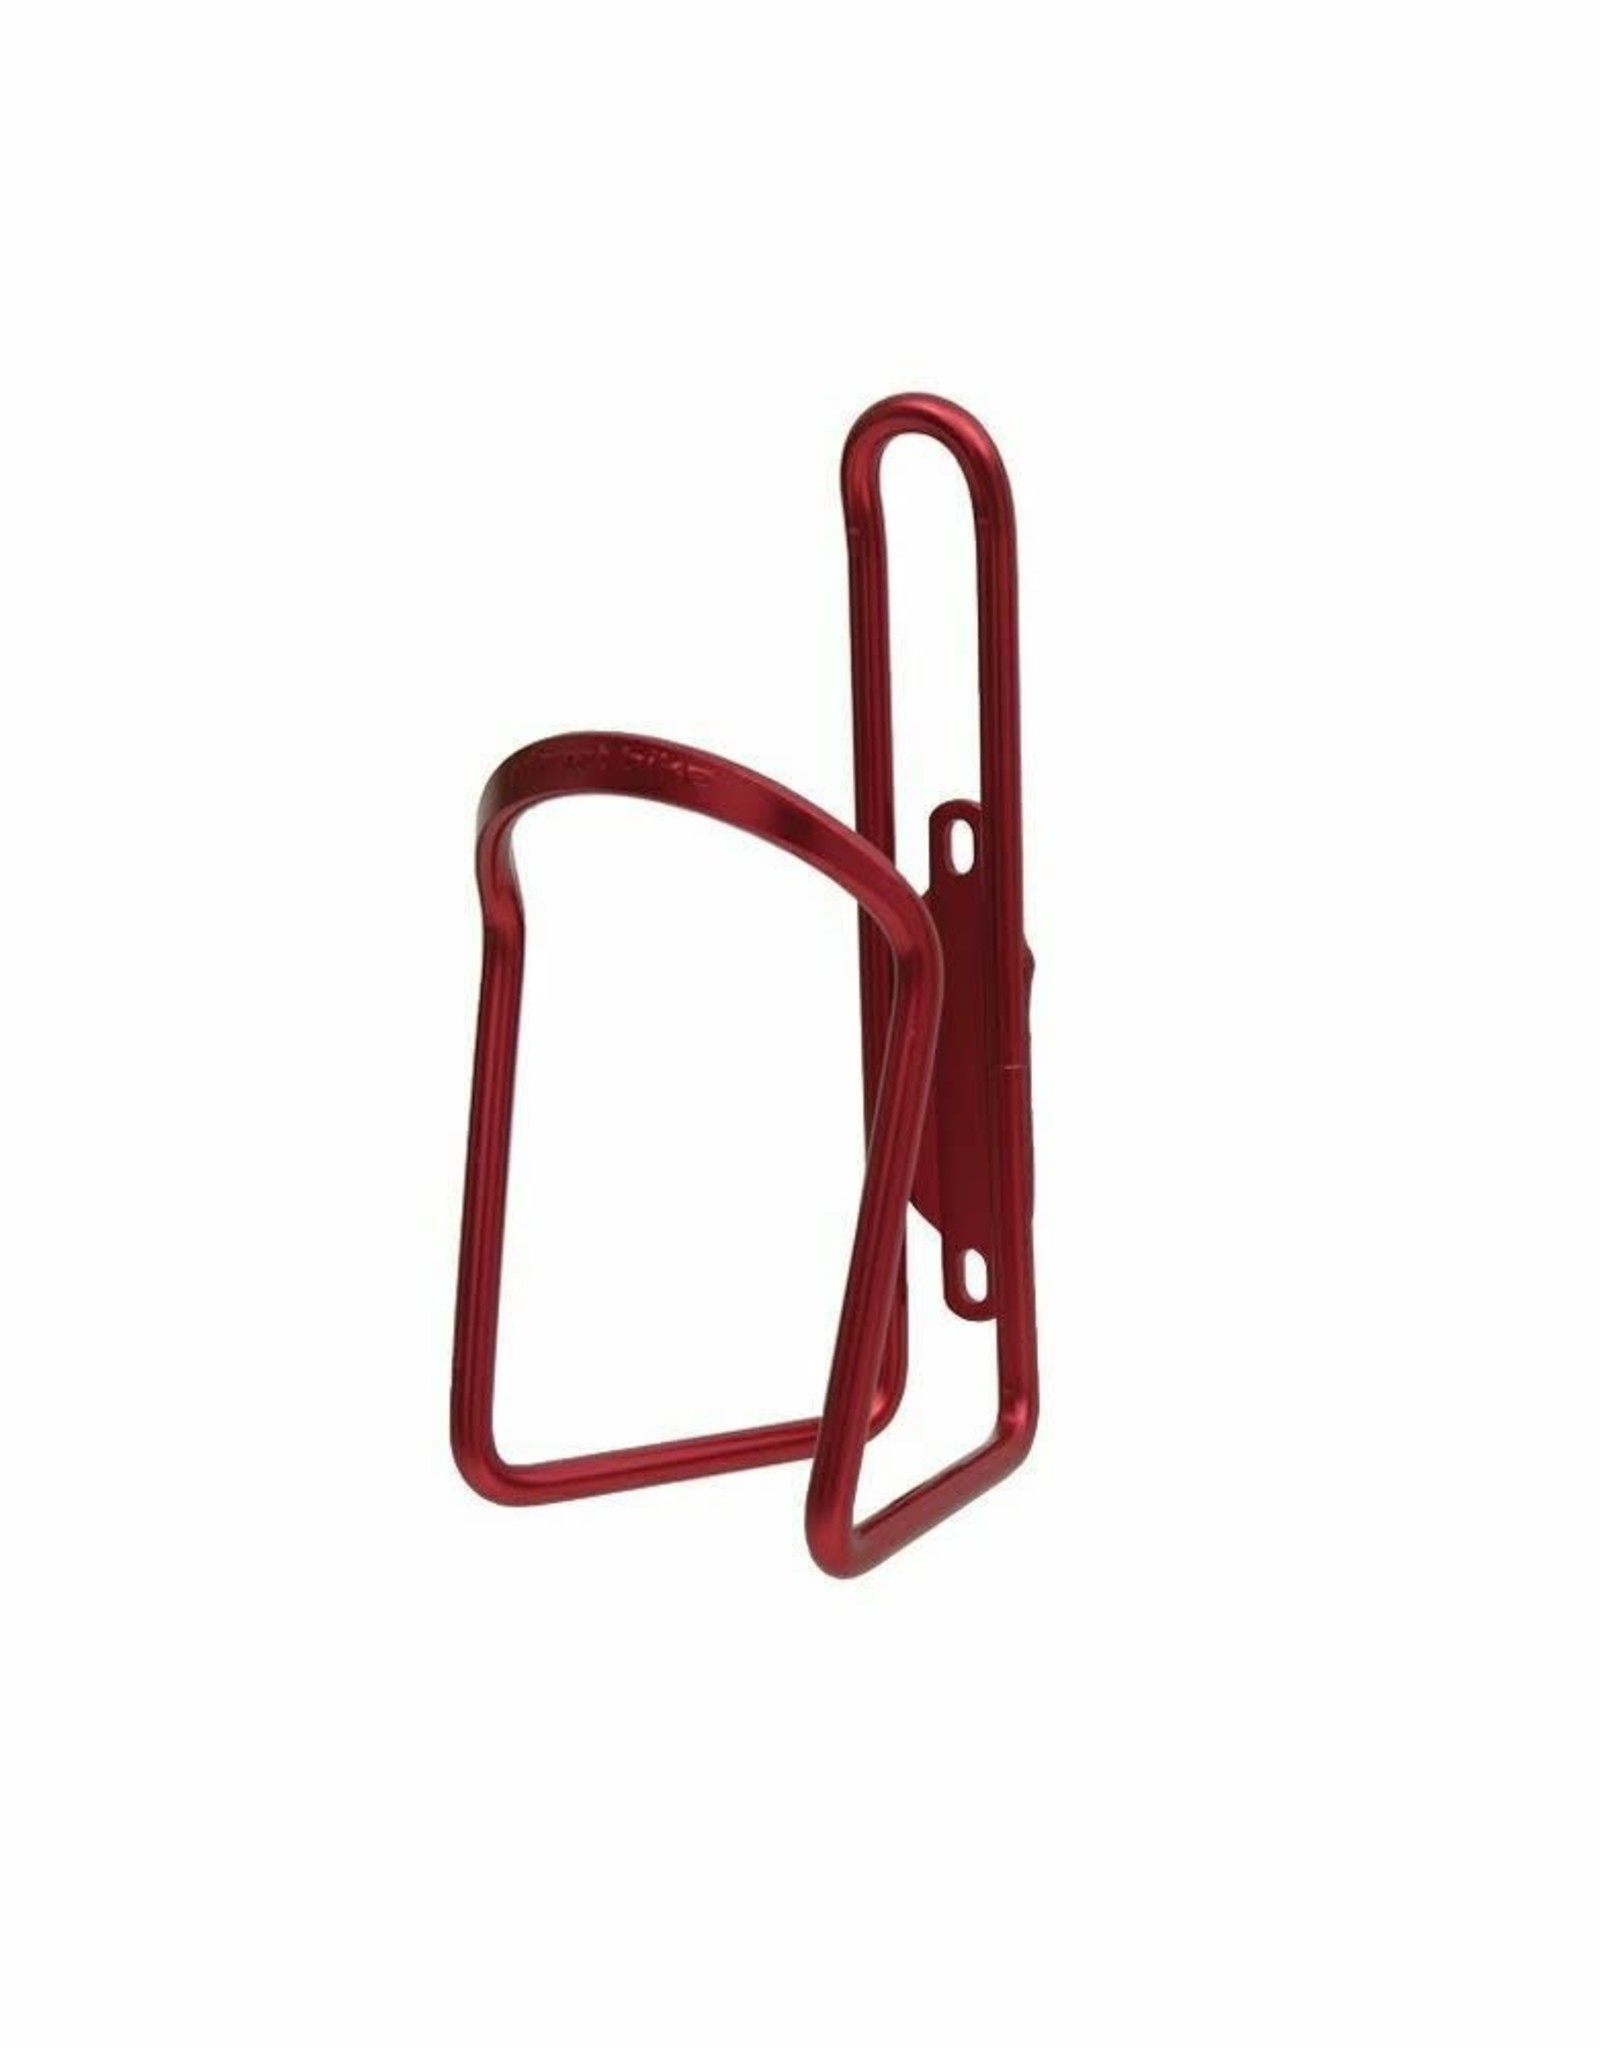 Planet Bike Planet Bike, Cage 6.2mm Alloy/Welded Red Welded Red